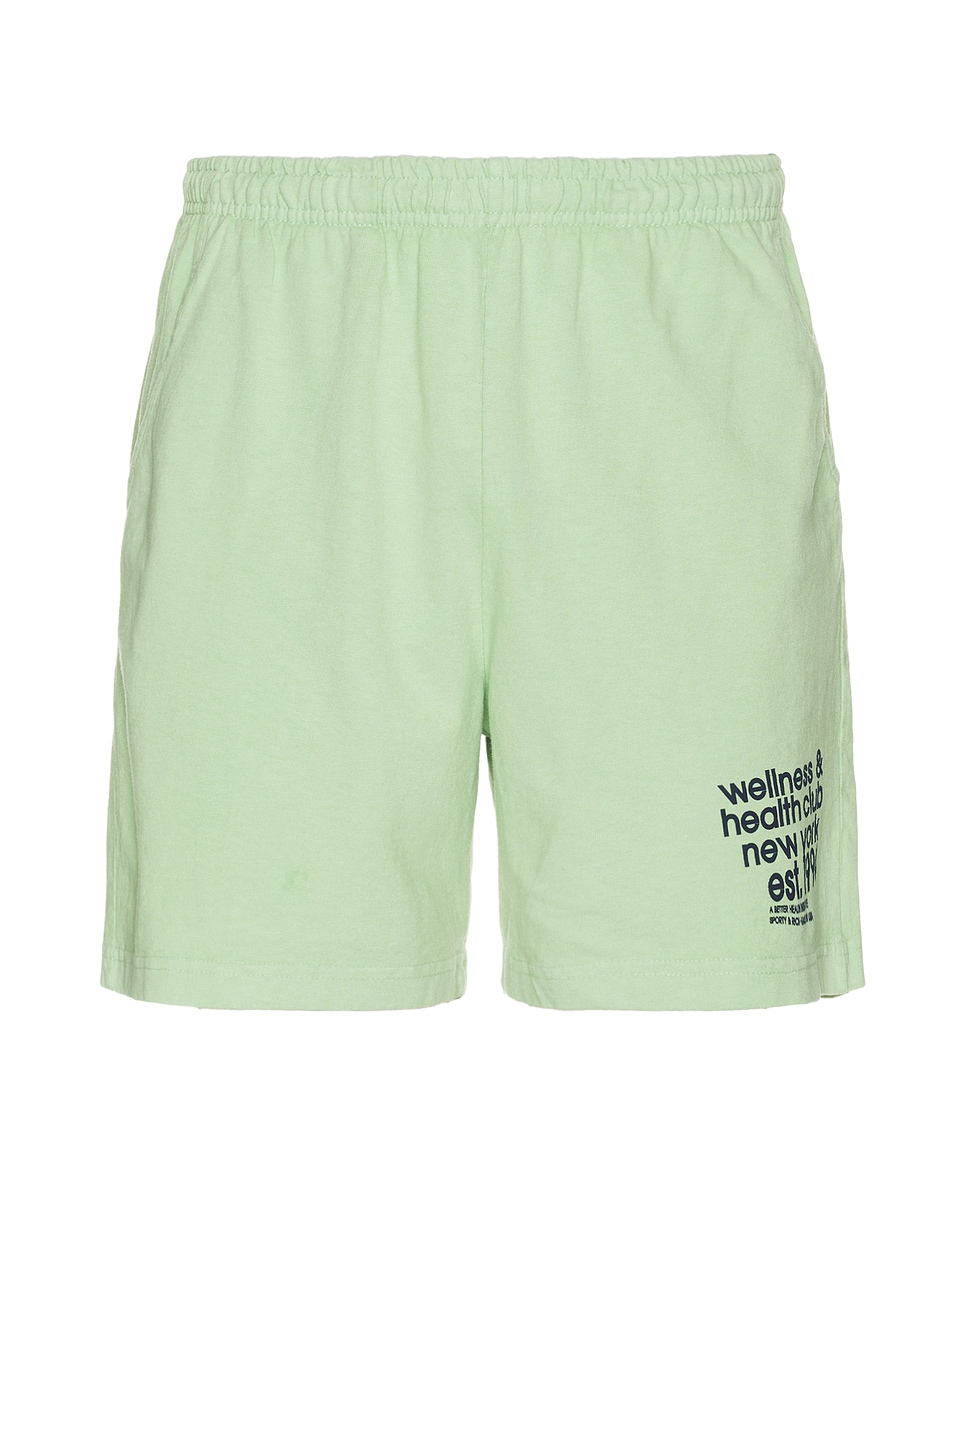 Image 1 of Sporty & Rich Usa Health Club Gym Shorts in Thyme